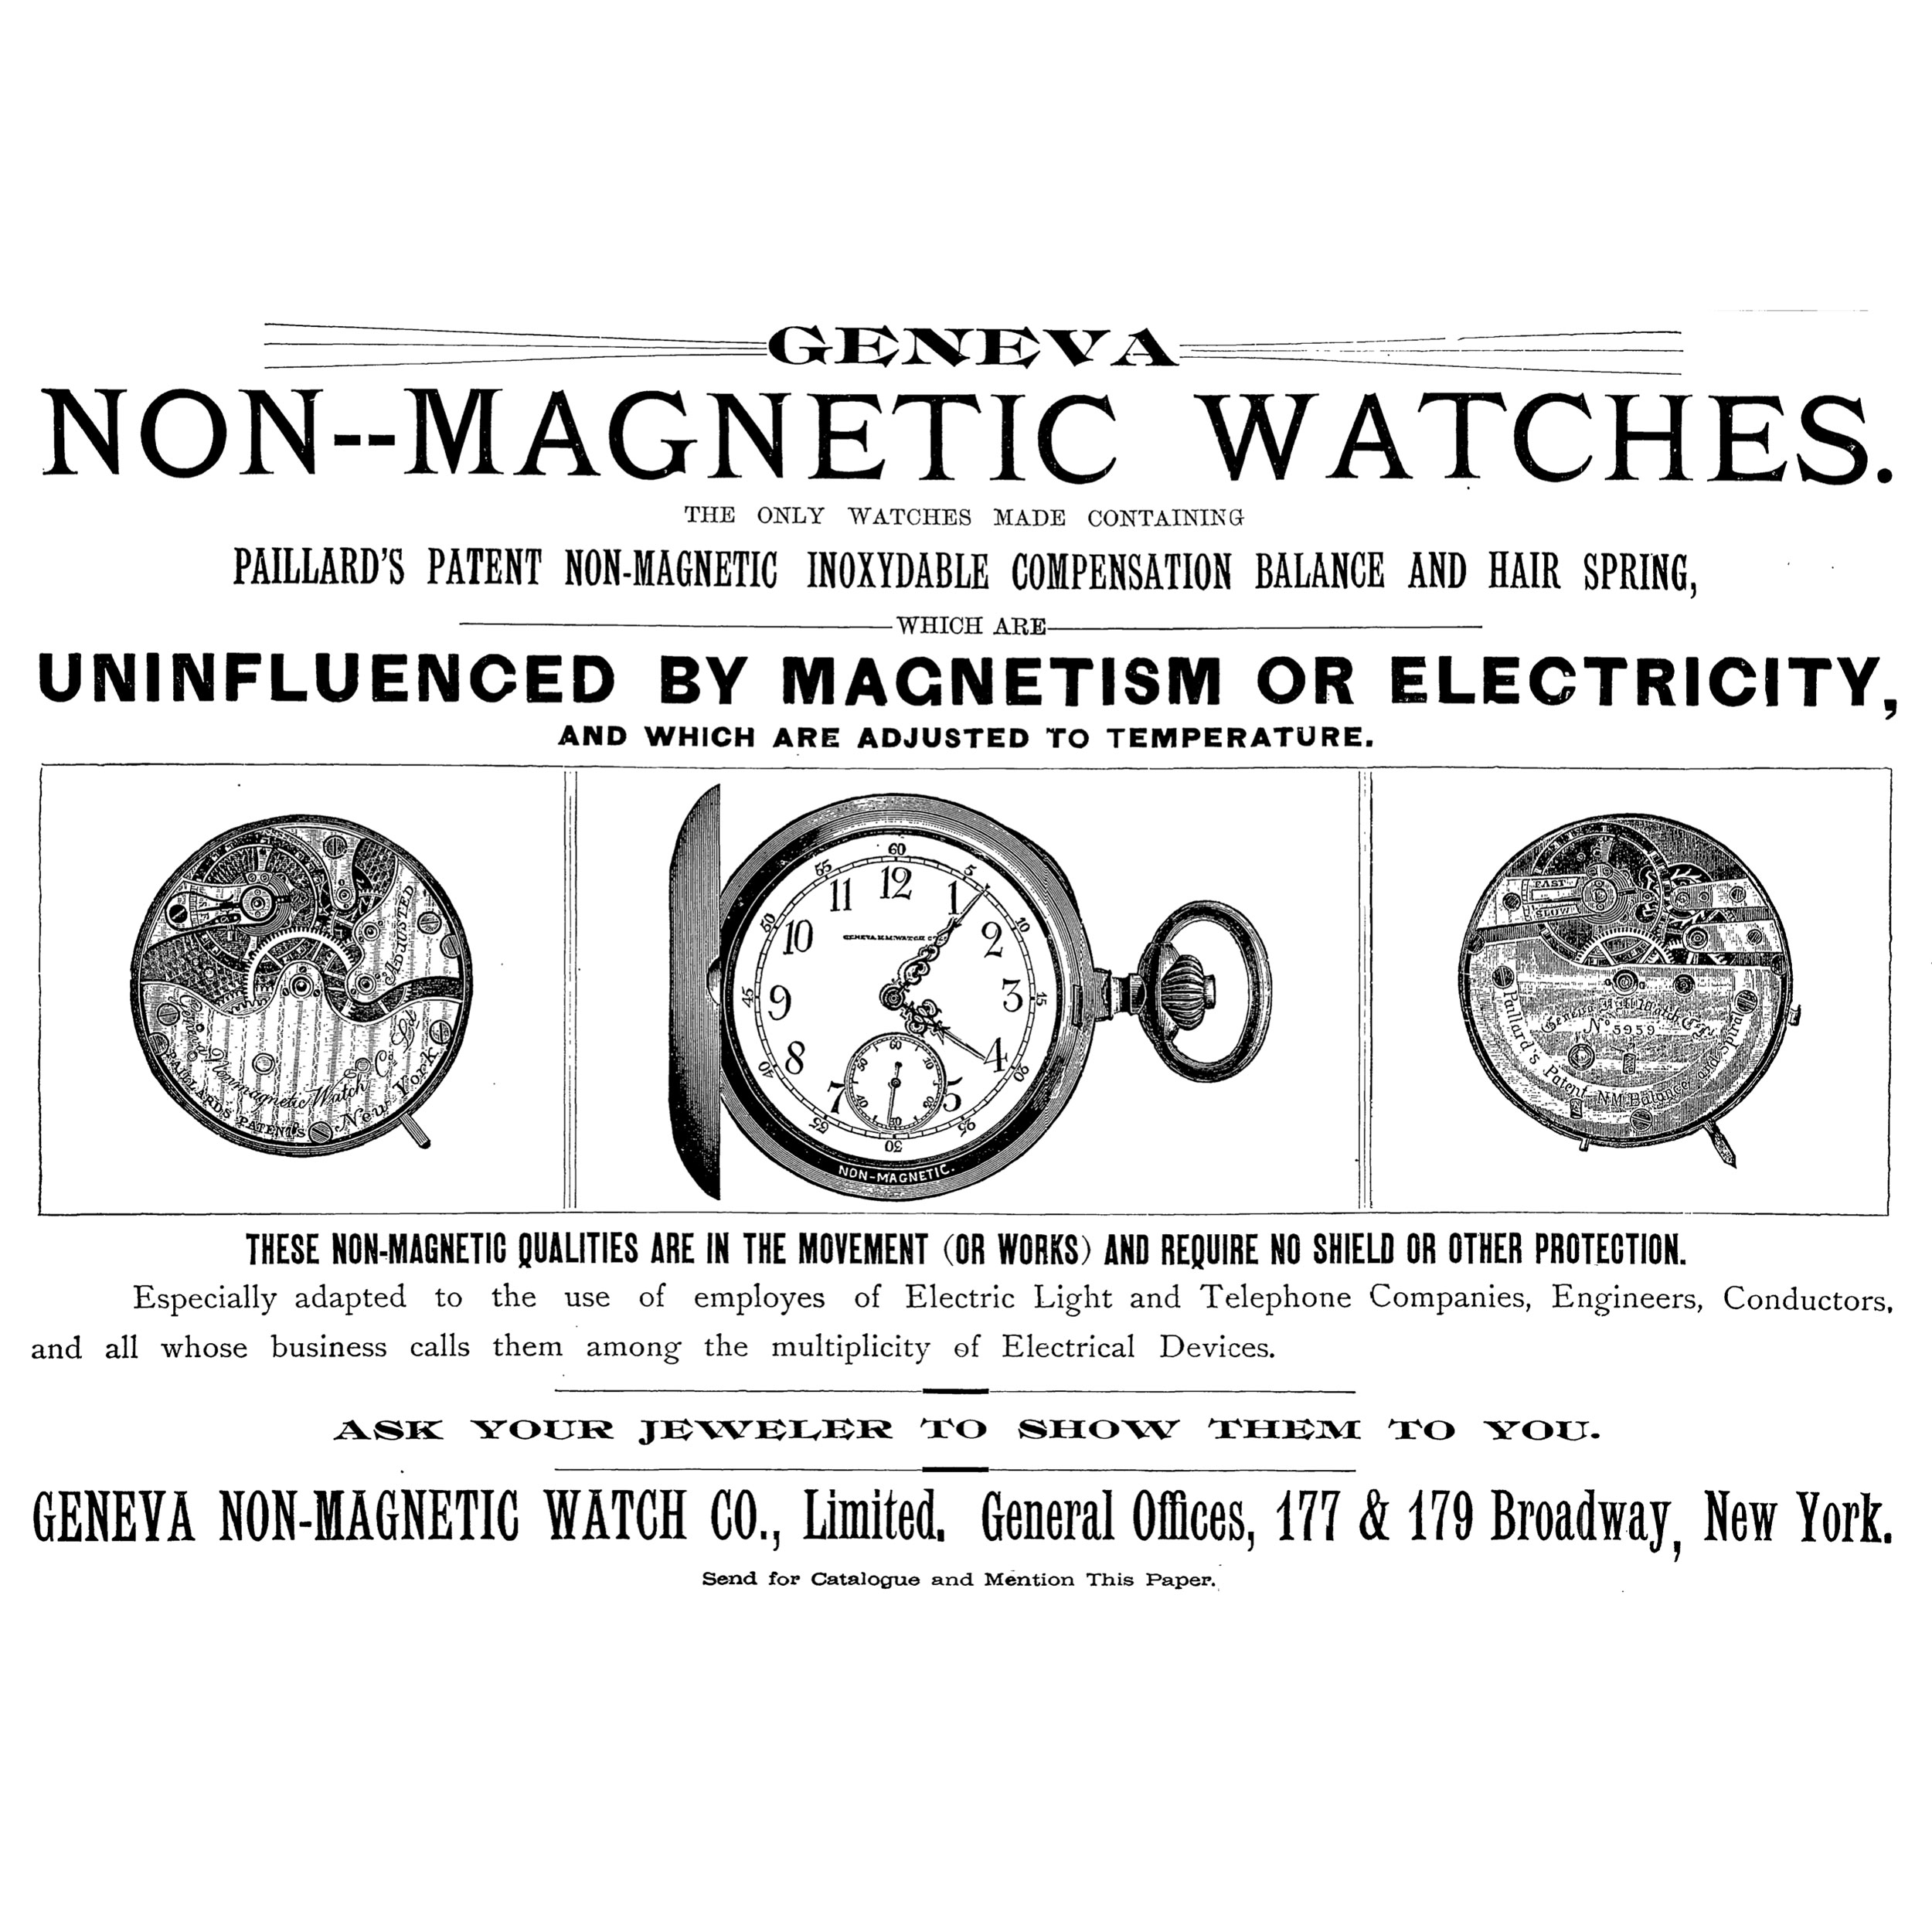 Private Label Trade Names on American Pocket Watches: “Burlington Watch  Co.” Part 6: Original Features - Pocket Watch Database Blog